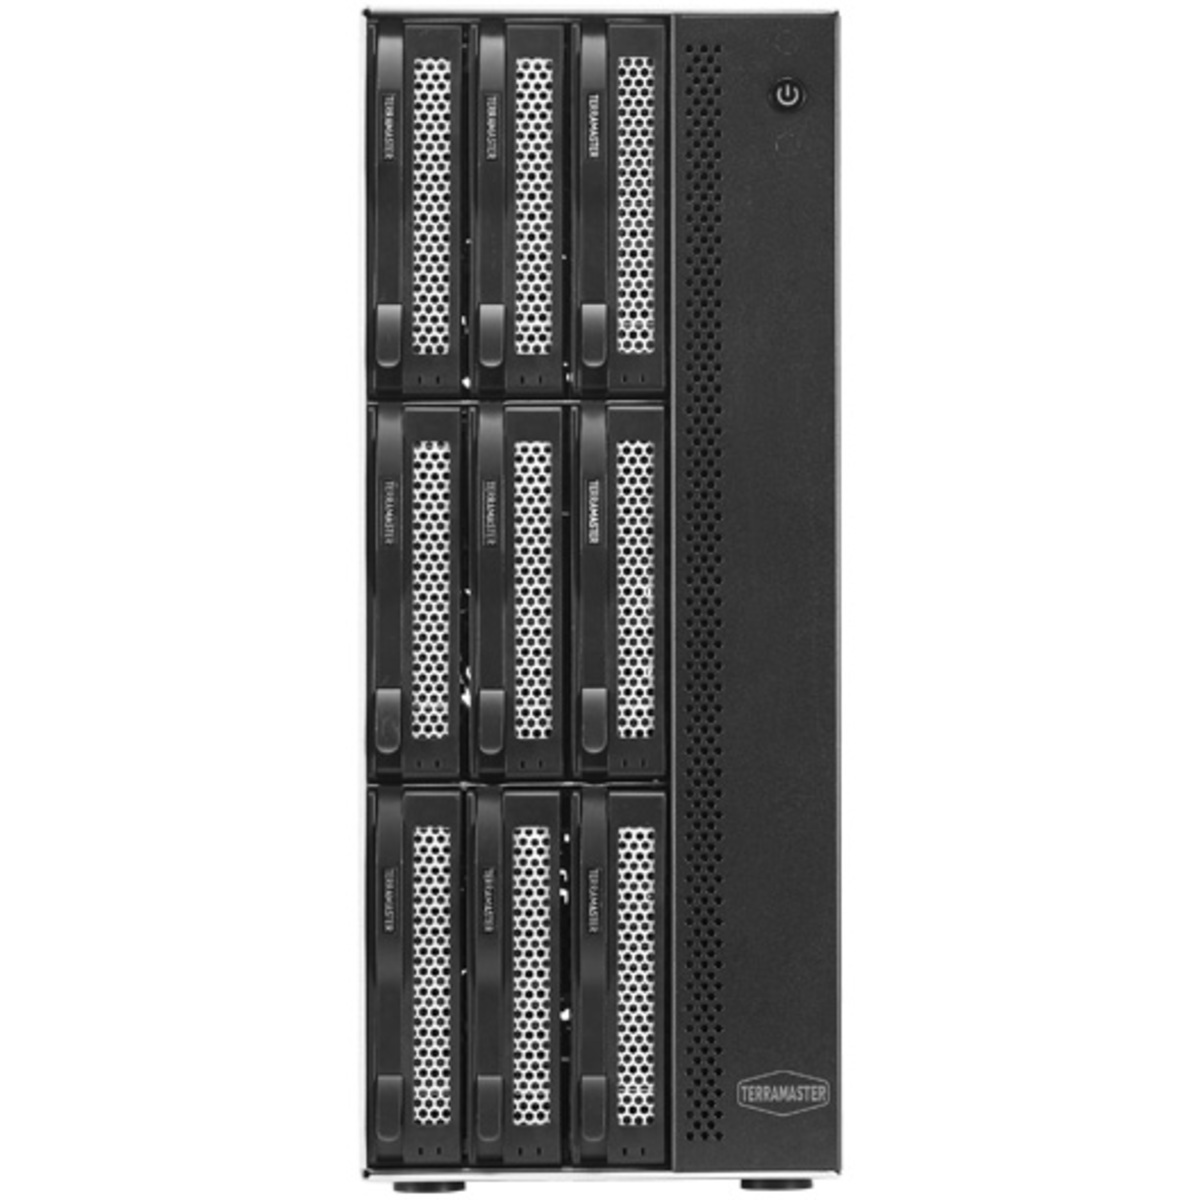 TerraMaster T9-450 84tb 9-Bay Desktop Multimedia / Power User / Business NAS - Network Attached Storage Device 6x14tb Seagate IronWolf Pro ST14000NT001 3.5 7200rpm SATA 6Gb/s HDD NAS Class Drives Installed - Burn-In Tested T9-450